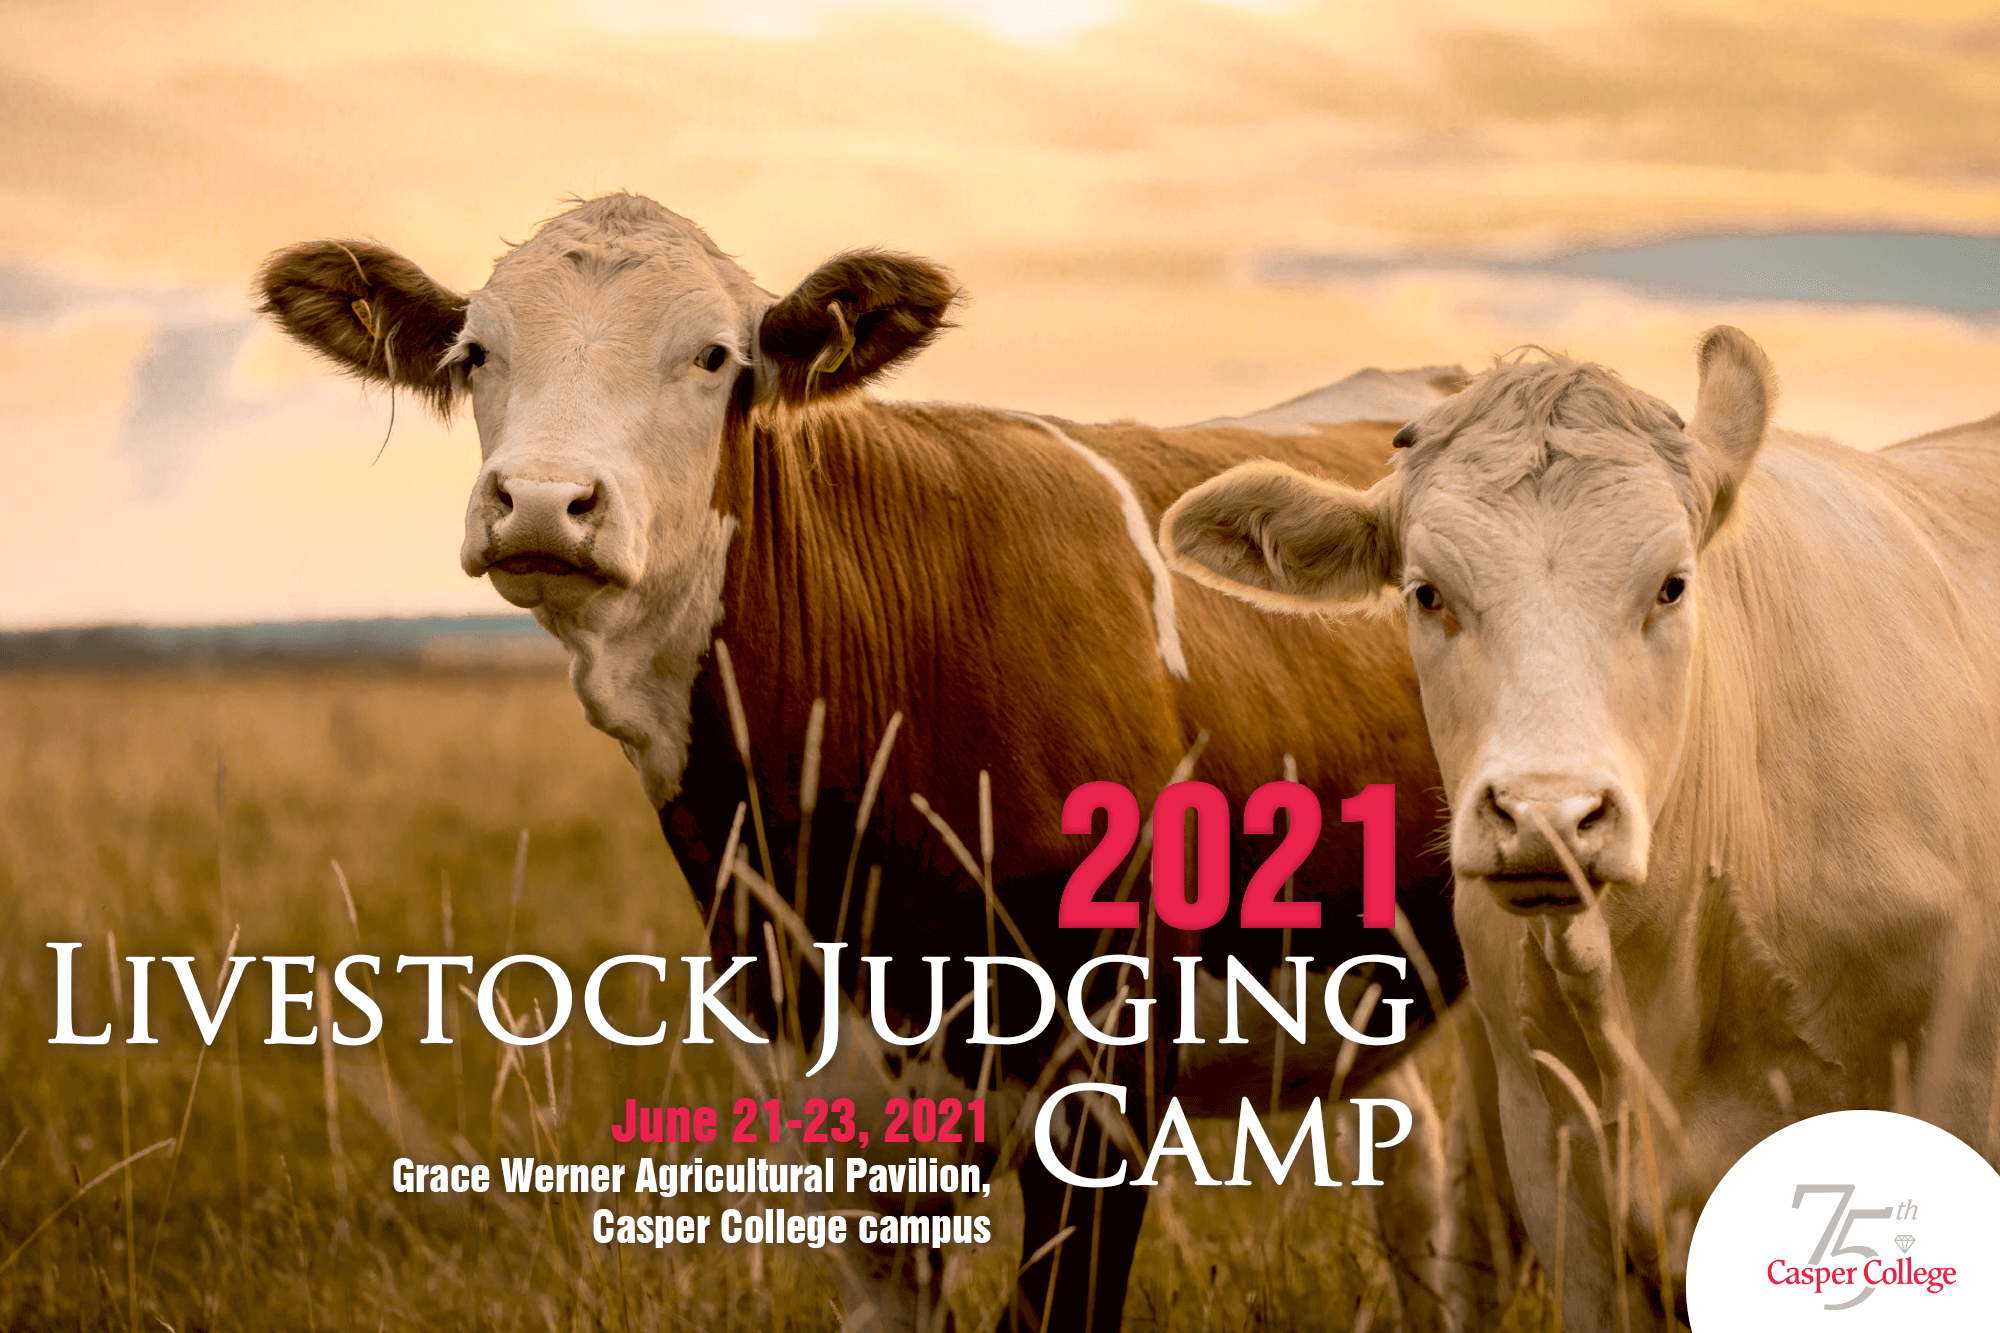 Image of two cows with the words "Livestock Judging Camp."